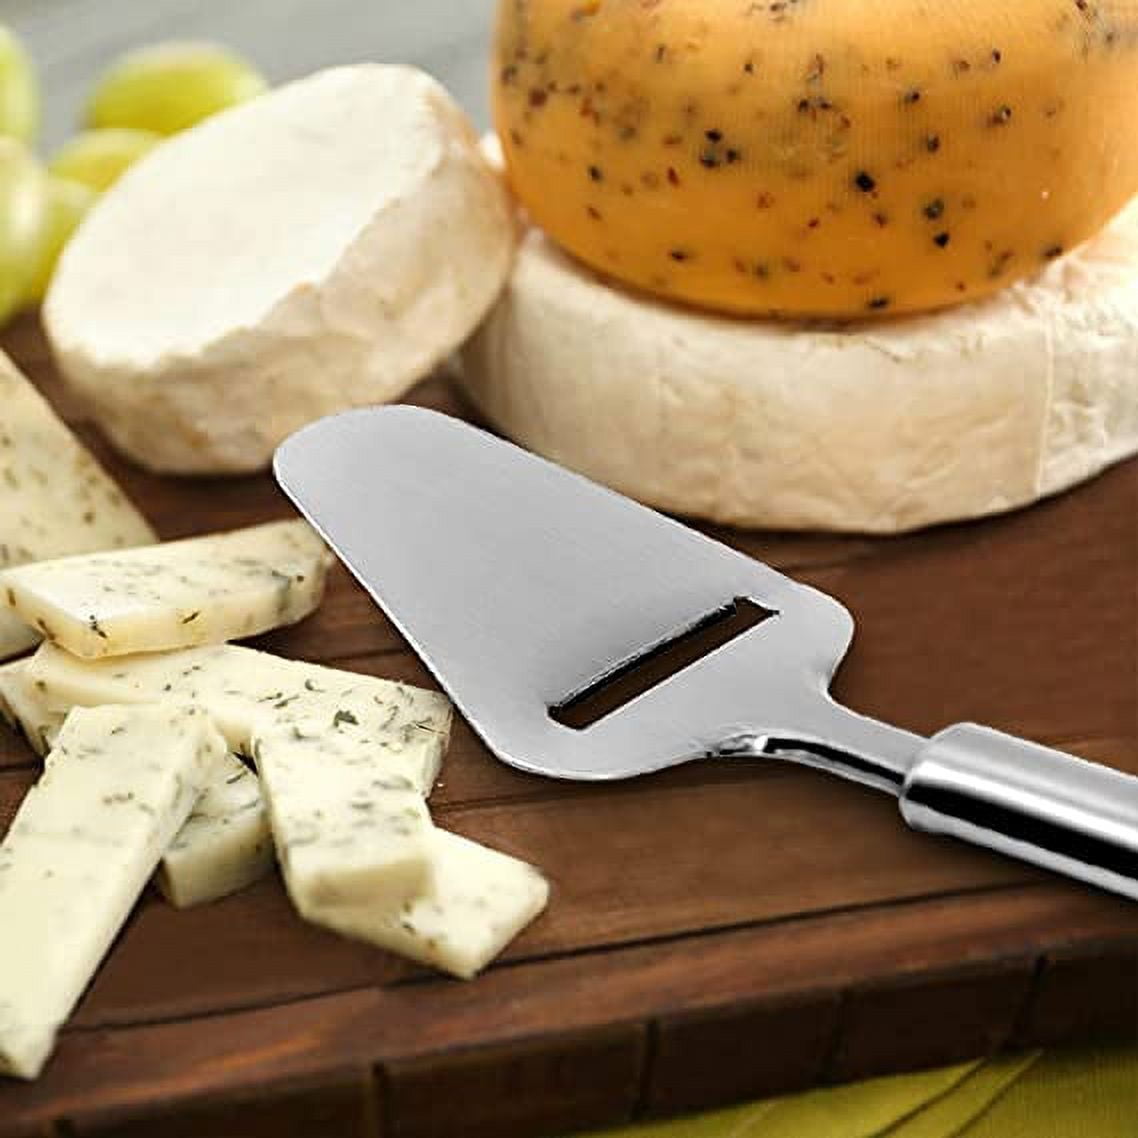 Gianna Stainless Steel Sturdy Wire Cheese Cutter with Adjustable Thickness  with 3.5 Inch Wide Cheese Cube - Handy Kitchen Tool 